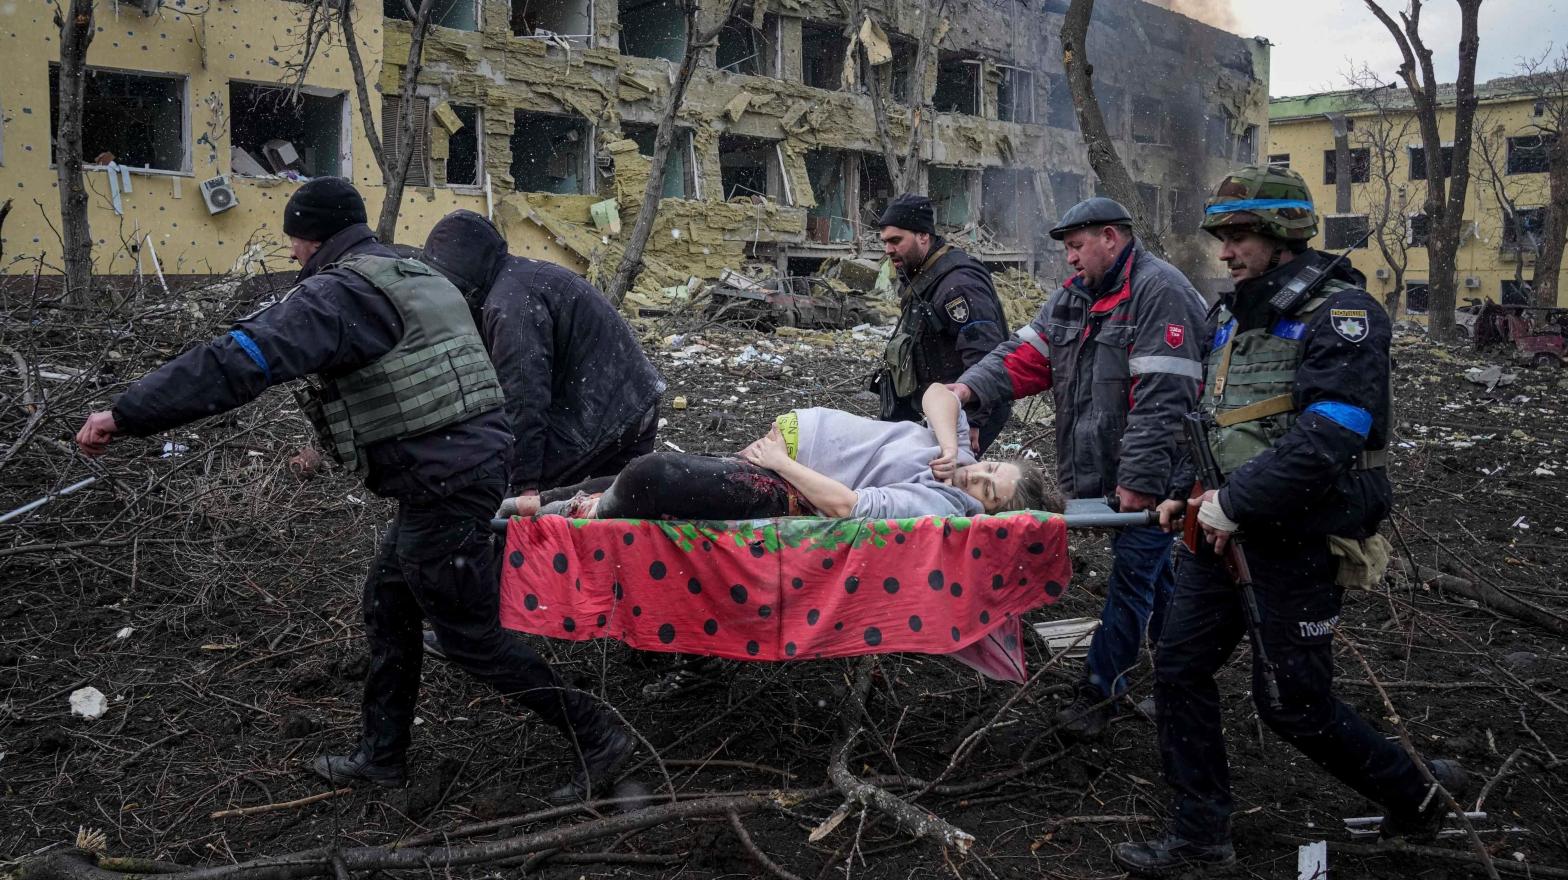 An unnamed pregnant woman who Russian propaganda sources said was a crisis actor, but later died, photographed in Mariupol, Ukraine on March 9, 2022. (Photo: Evgeniy Maloletka, AP)